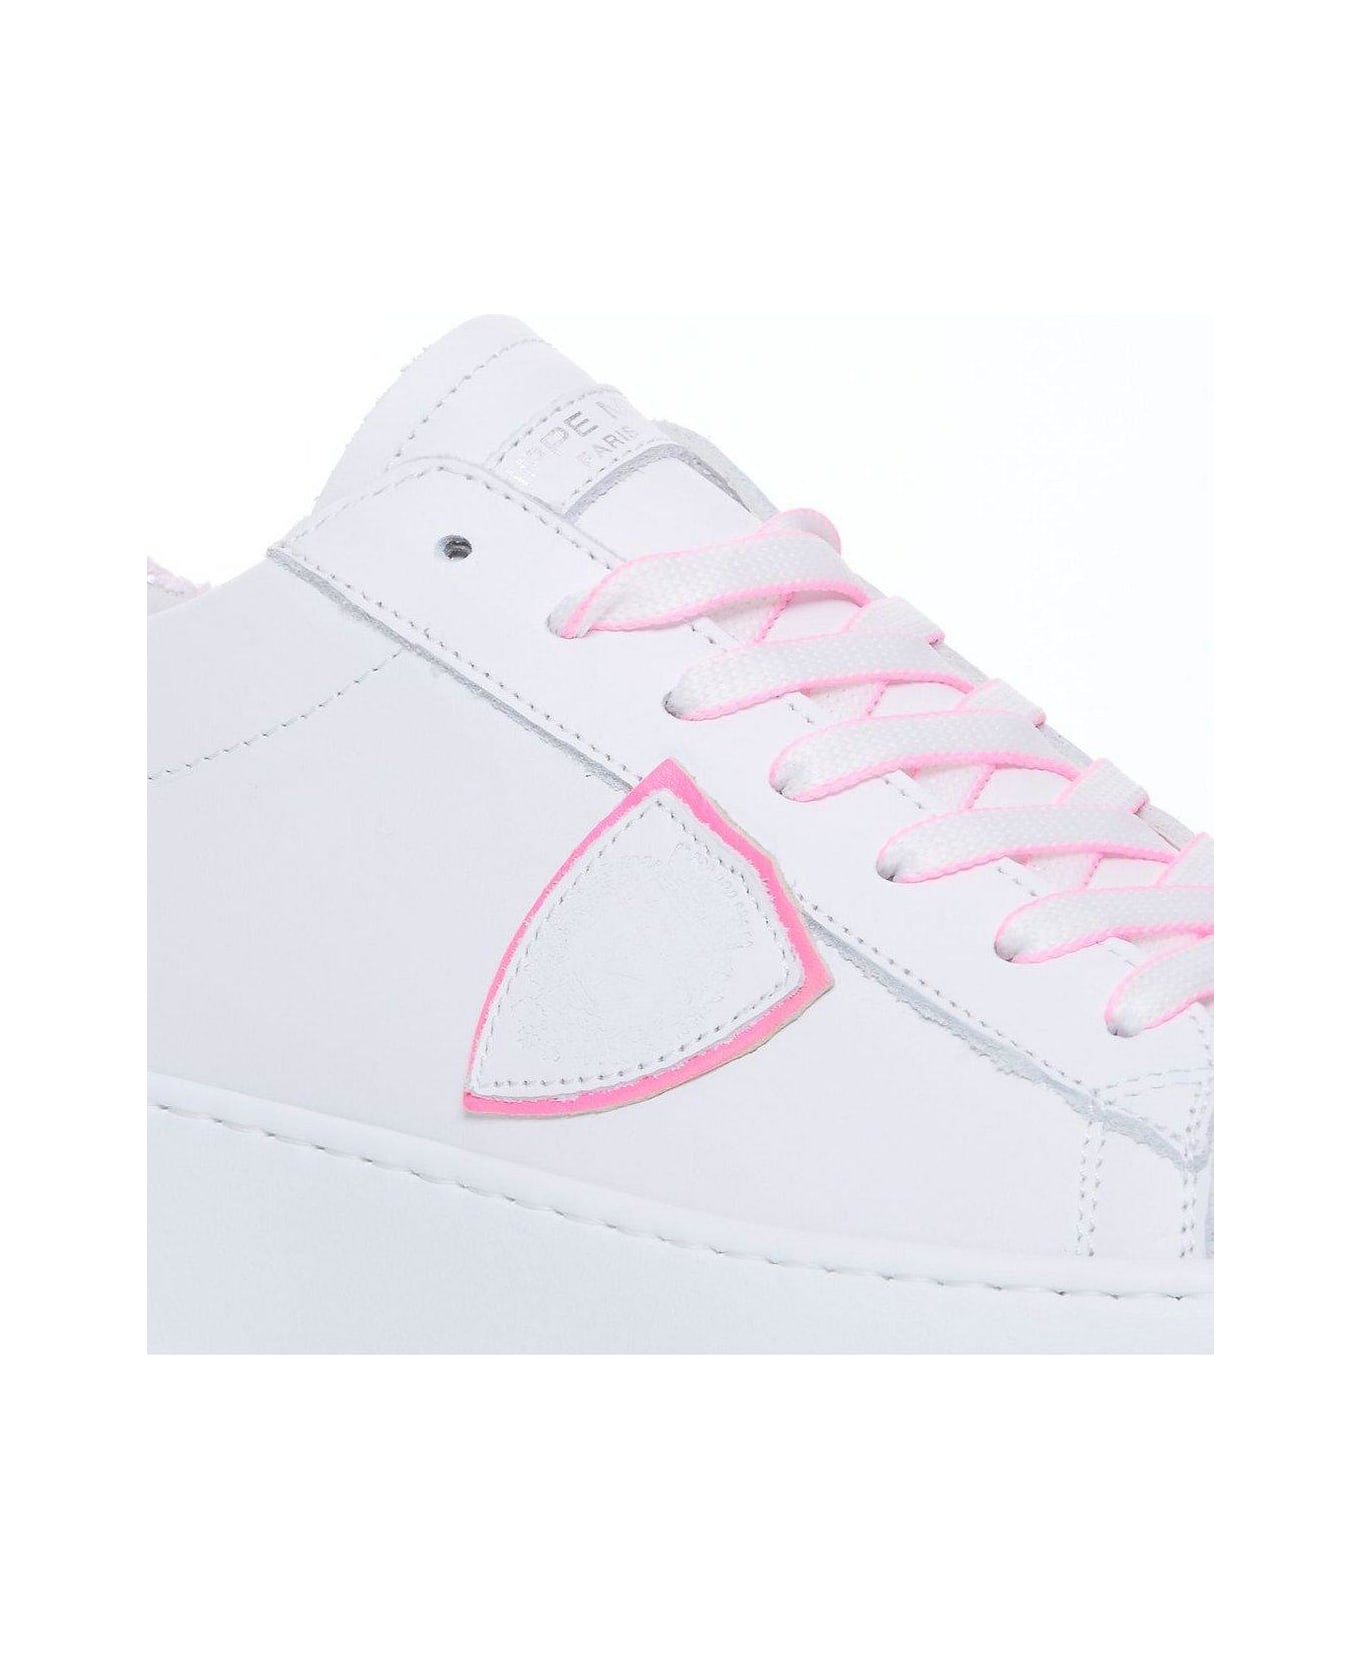 Philippe Model Tres Temple Lace Up Sneakers - Blanc Fucsia スニーカー